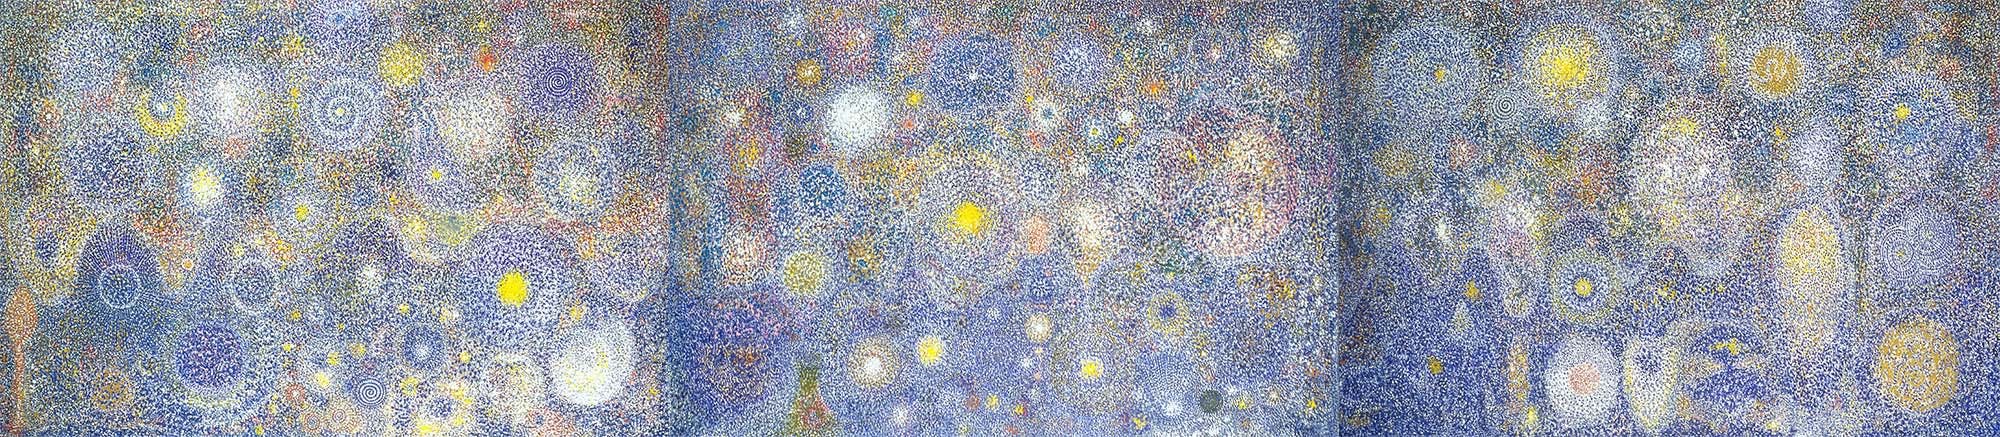 Radiance
1973–74
Acrylic on linen
72 x 324 in. (182.9 x 823 cm)
 – The Richard Pousette-Dart Foundation